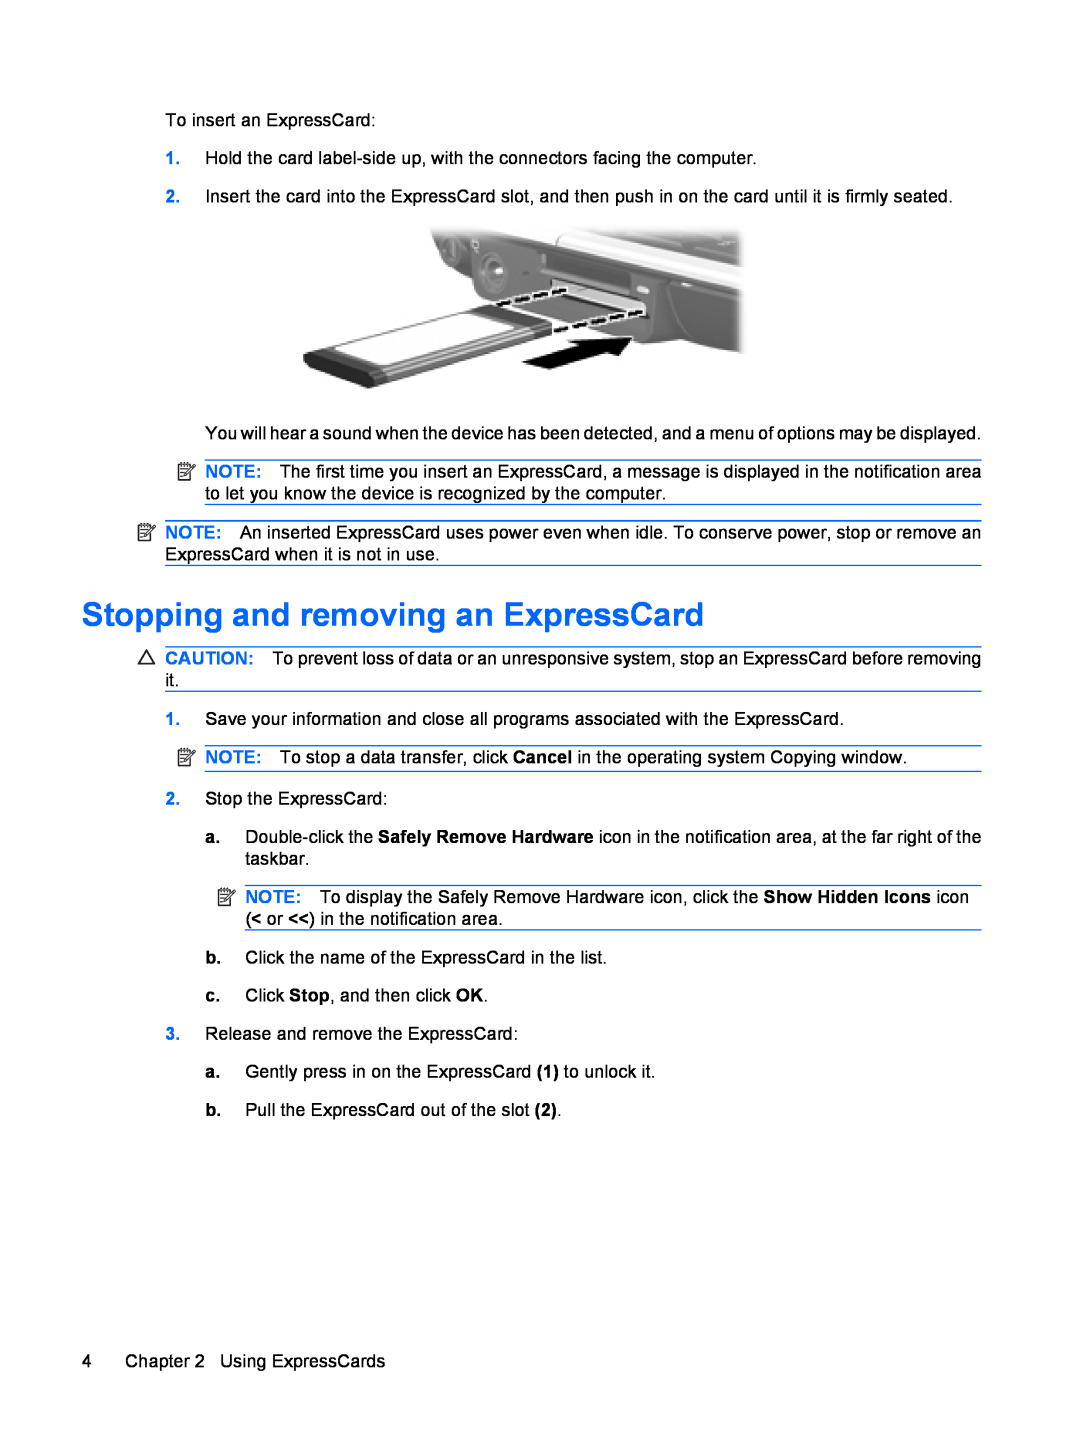 HP t09au, tx2-1277nr, tx2-1207au, tx2-1274nr, tx2-1270us, tx2-1208au, tx2-1209au, t22au Stopping and removing an ExpressCard 